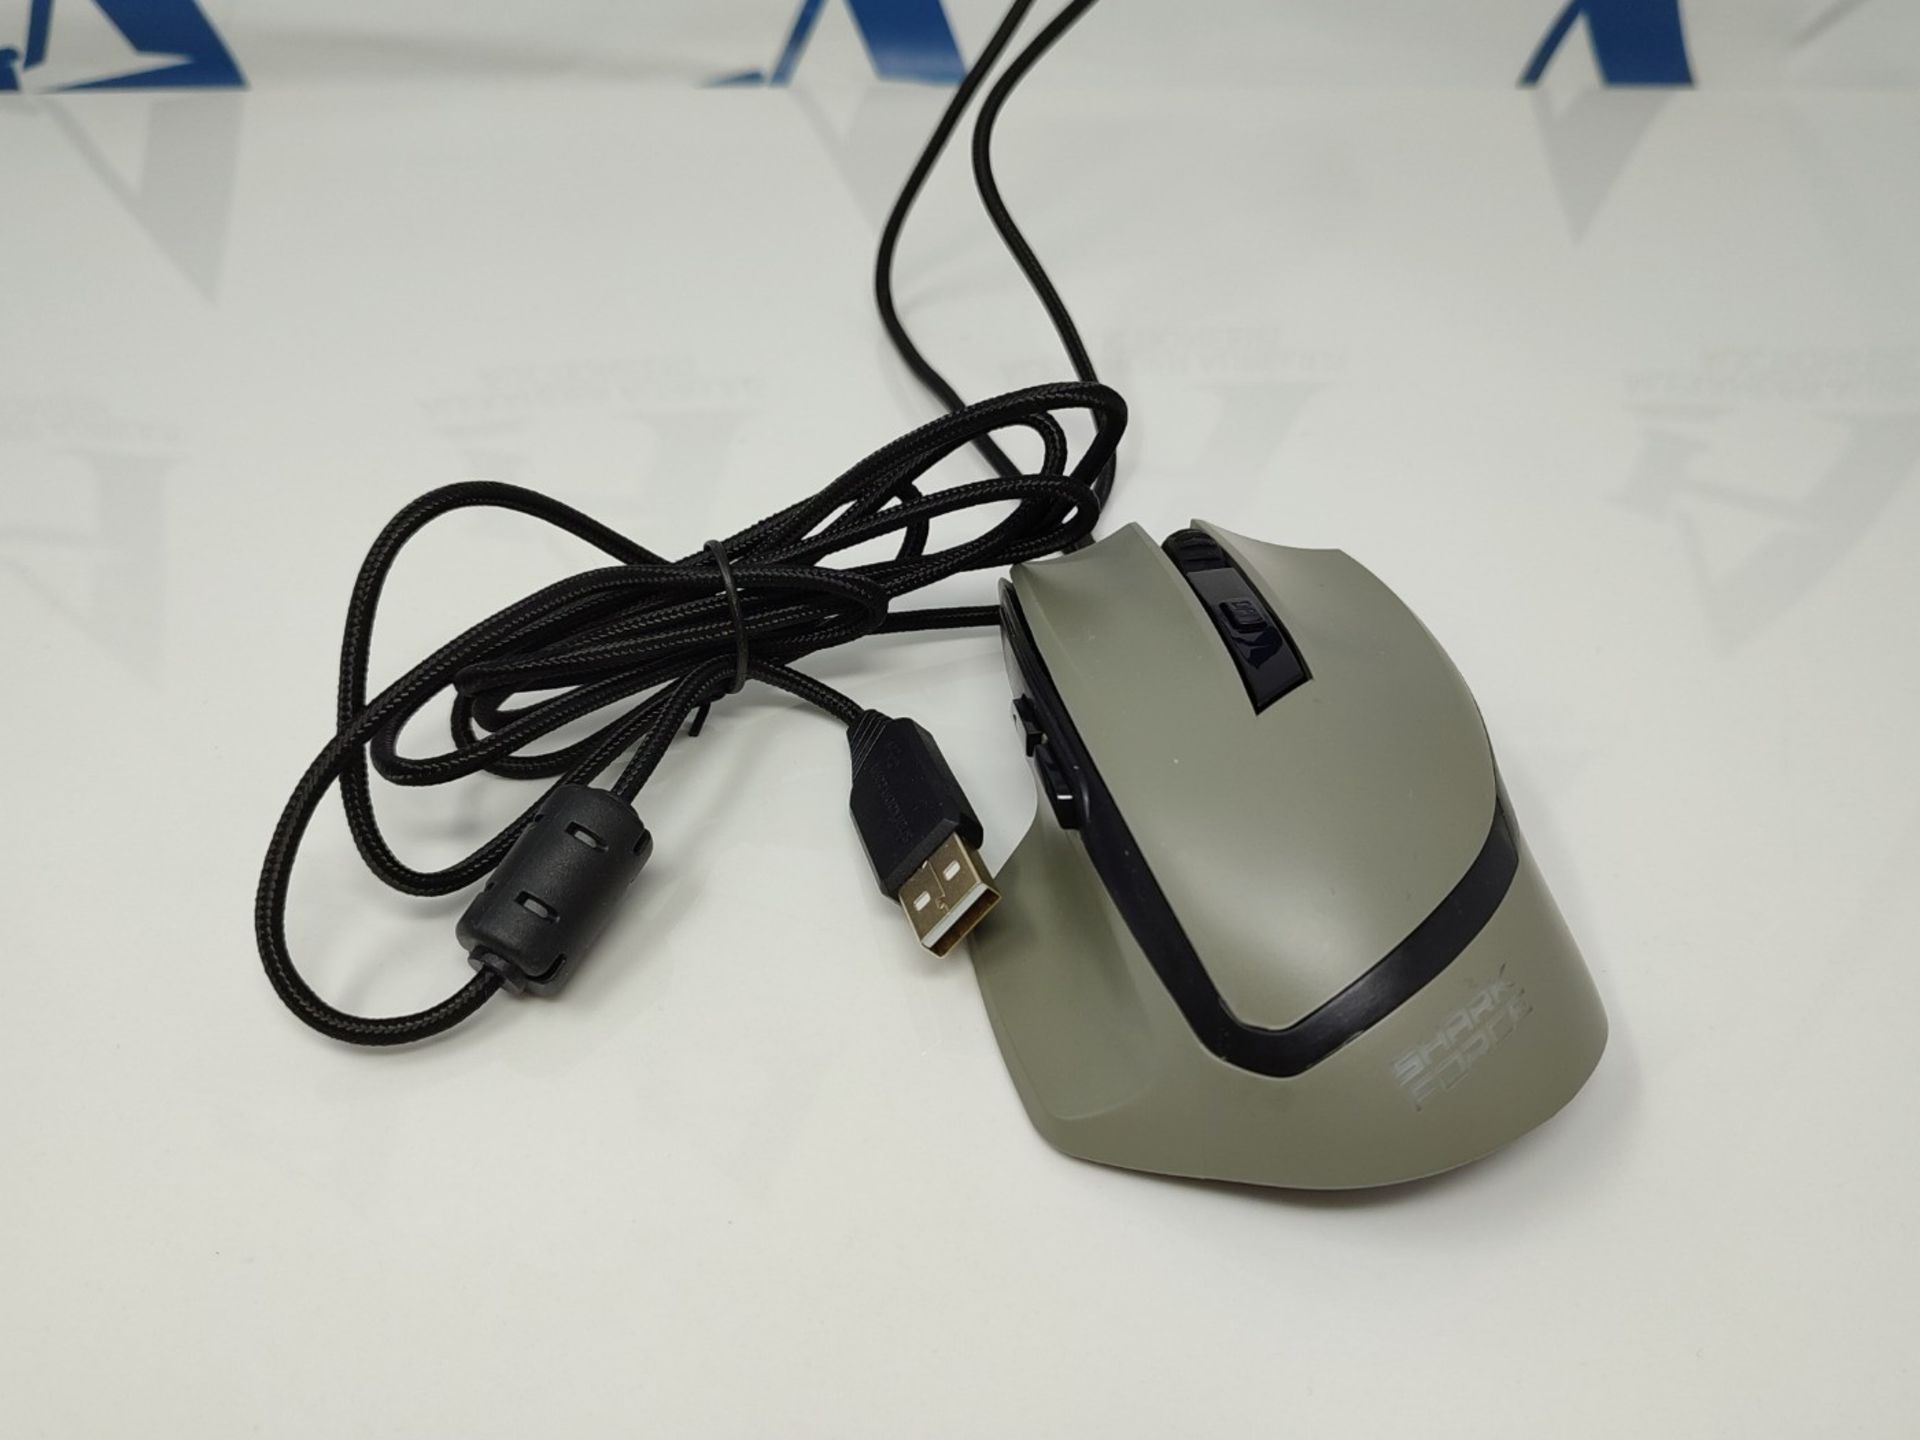 Sharkoon Shark Force II - Gaming Mouse, Color: Gray - Image 3 of 3